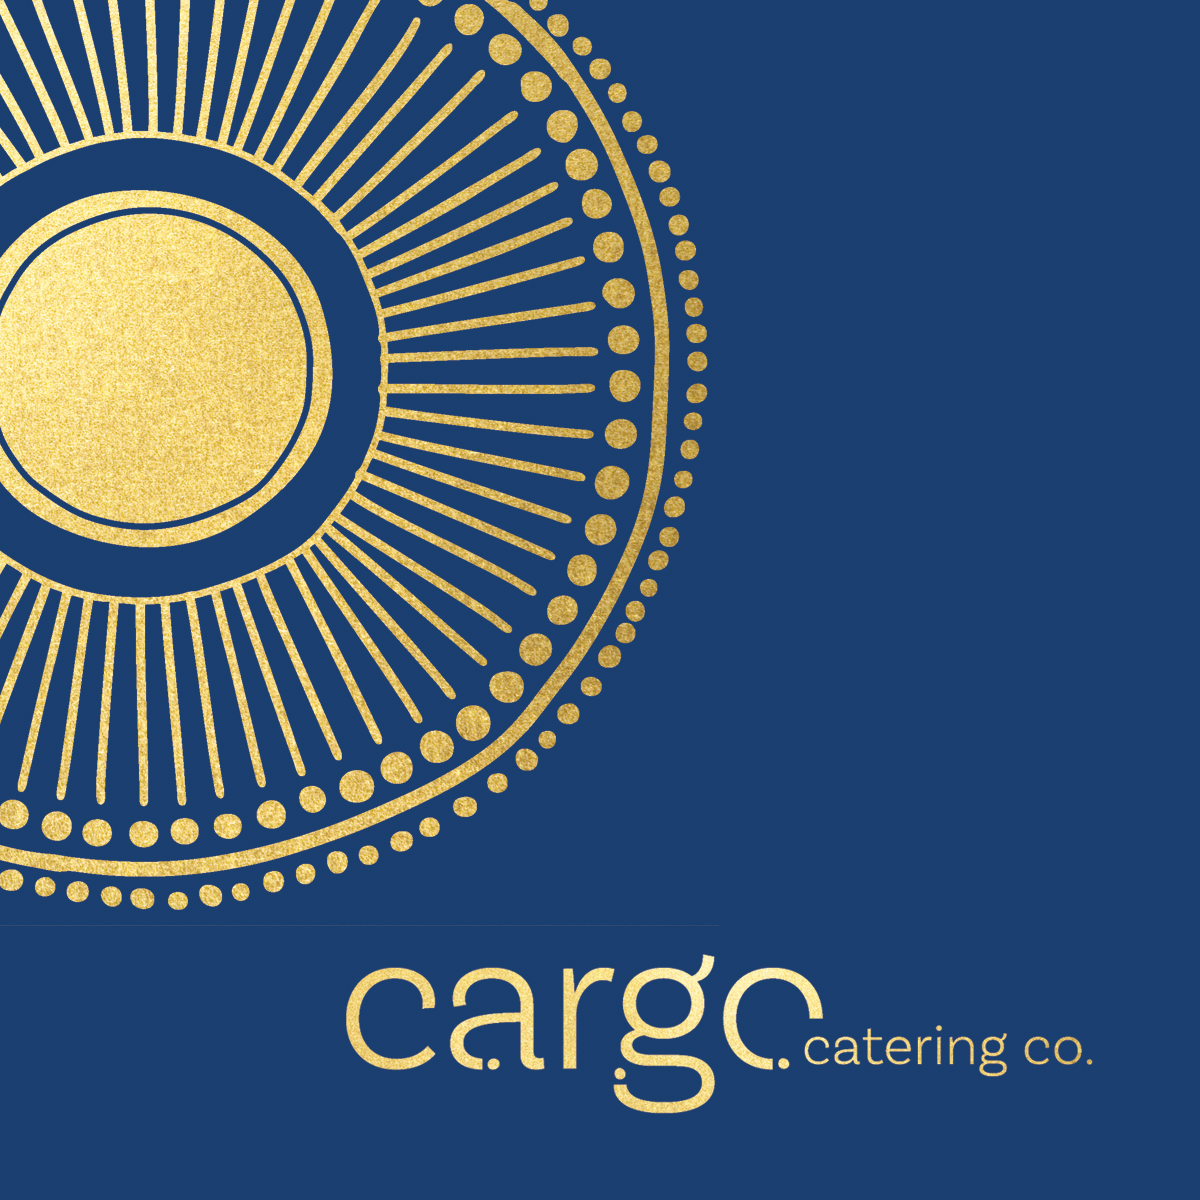 Cargo Caterging Co Logo 3